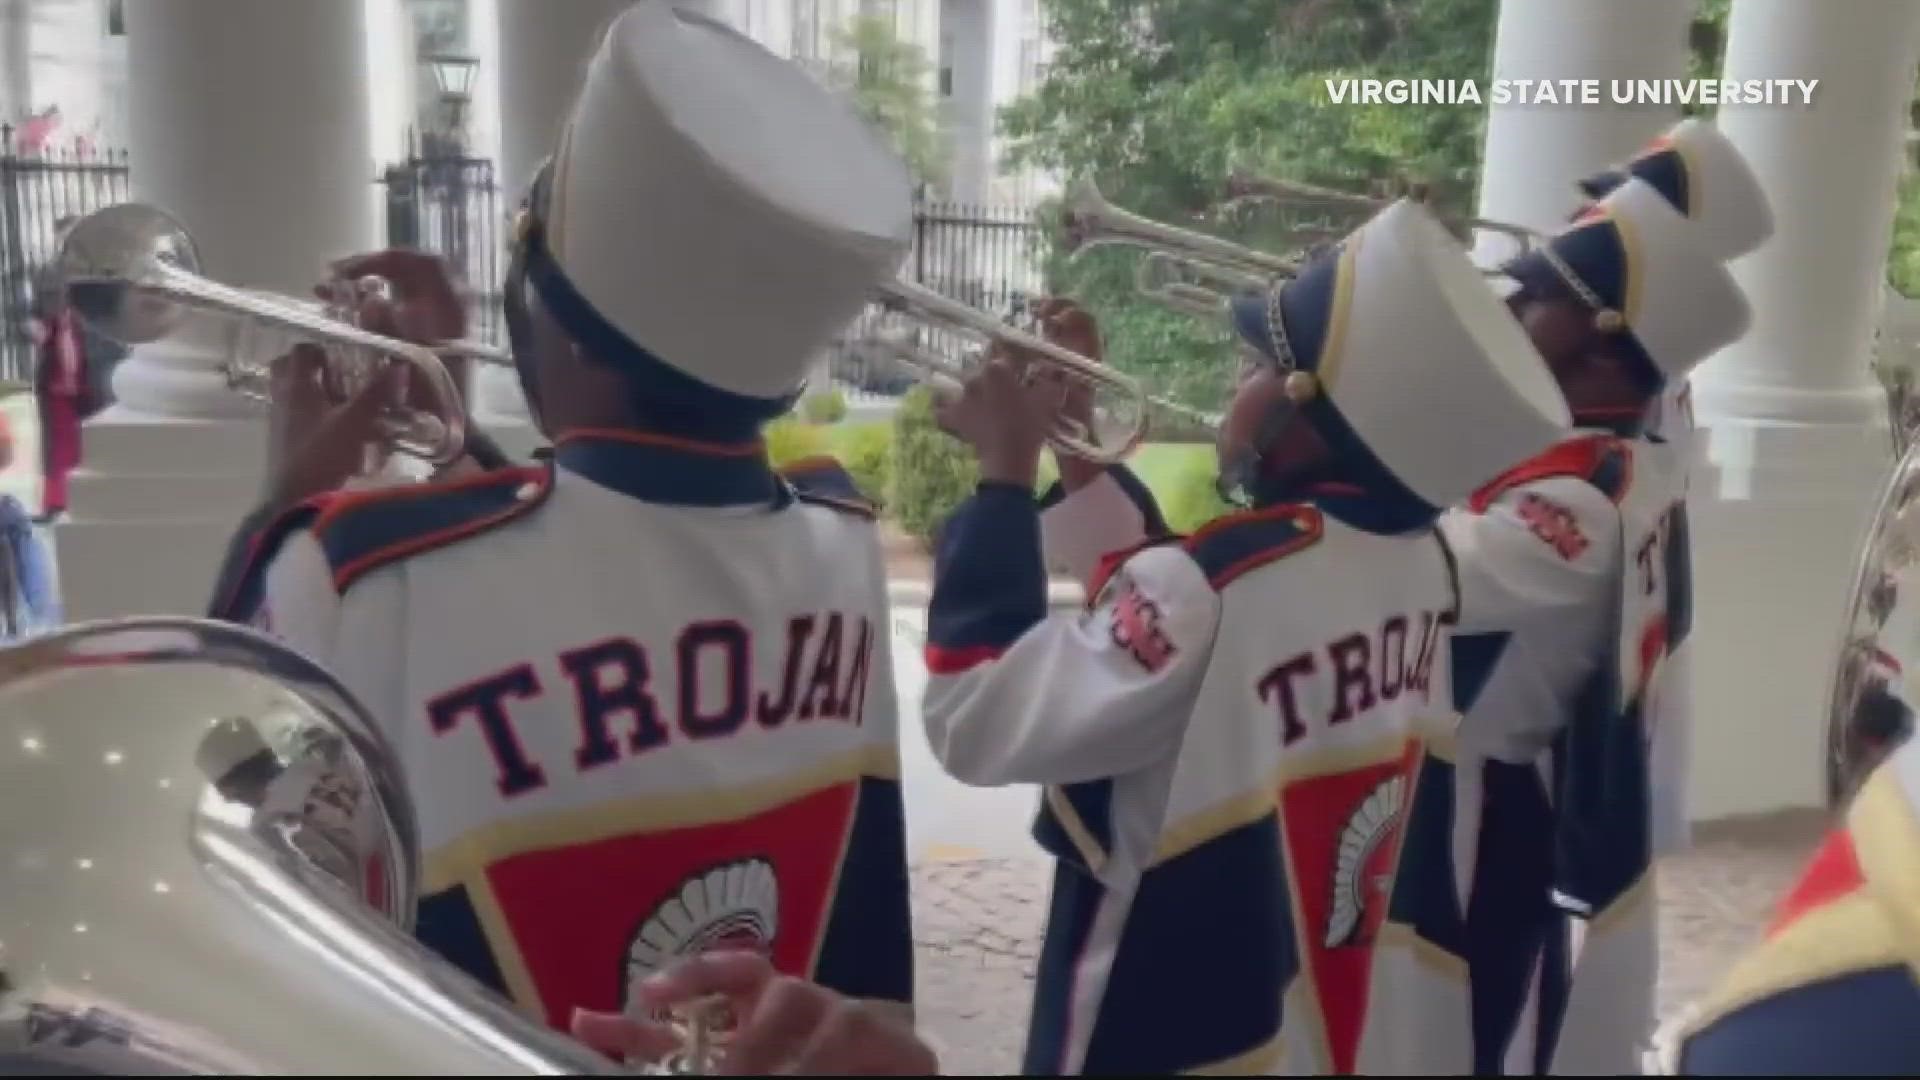 This is the first time a university marching band has been asked to play at this event.